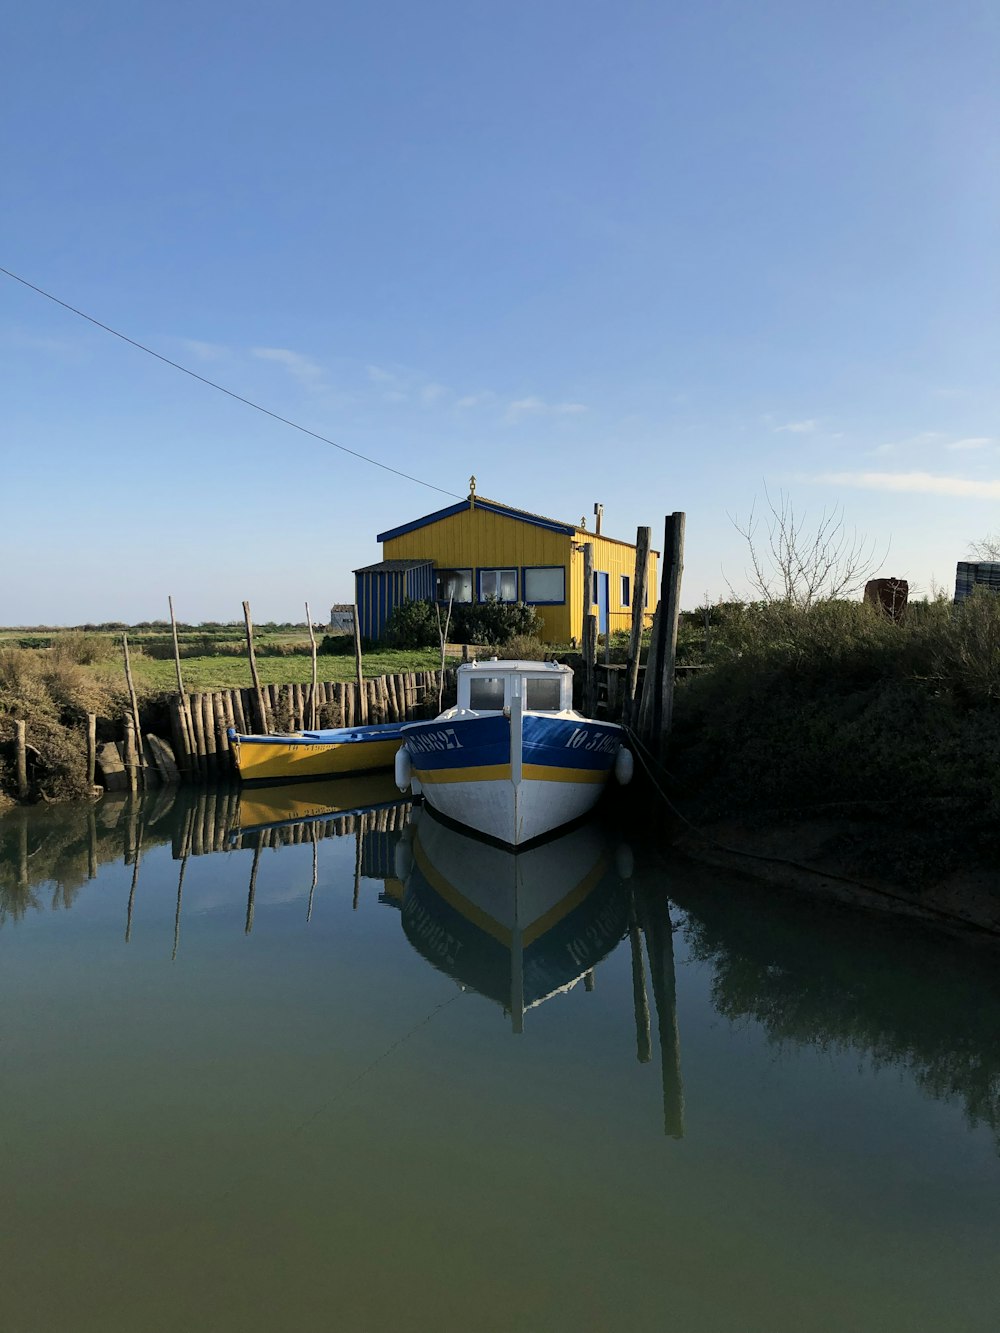 a boat sitting in the water next to a yellow house